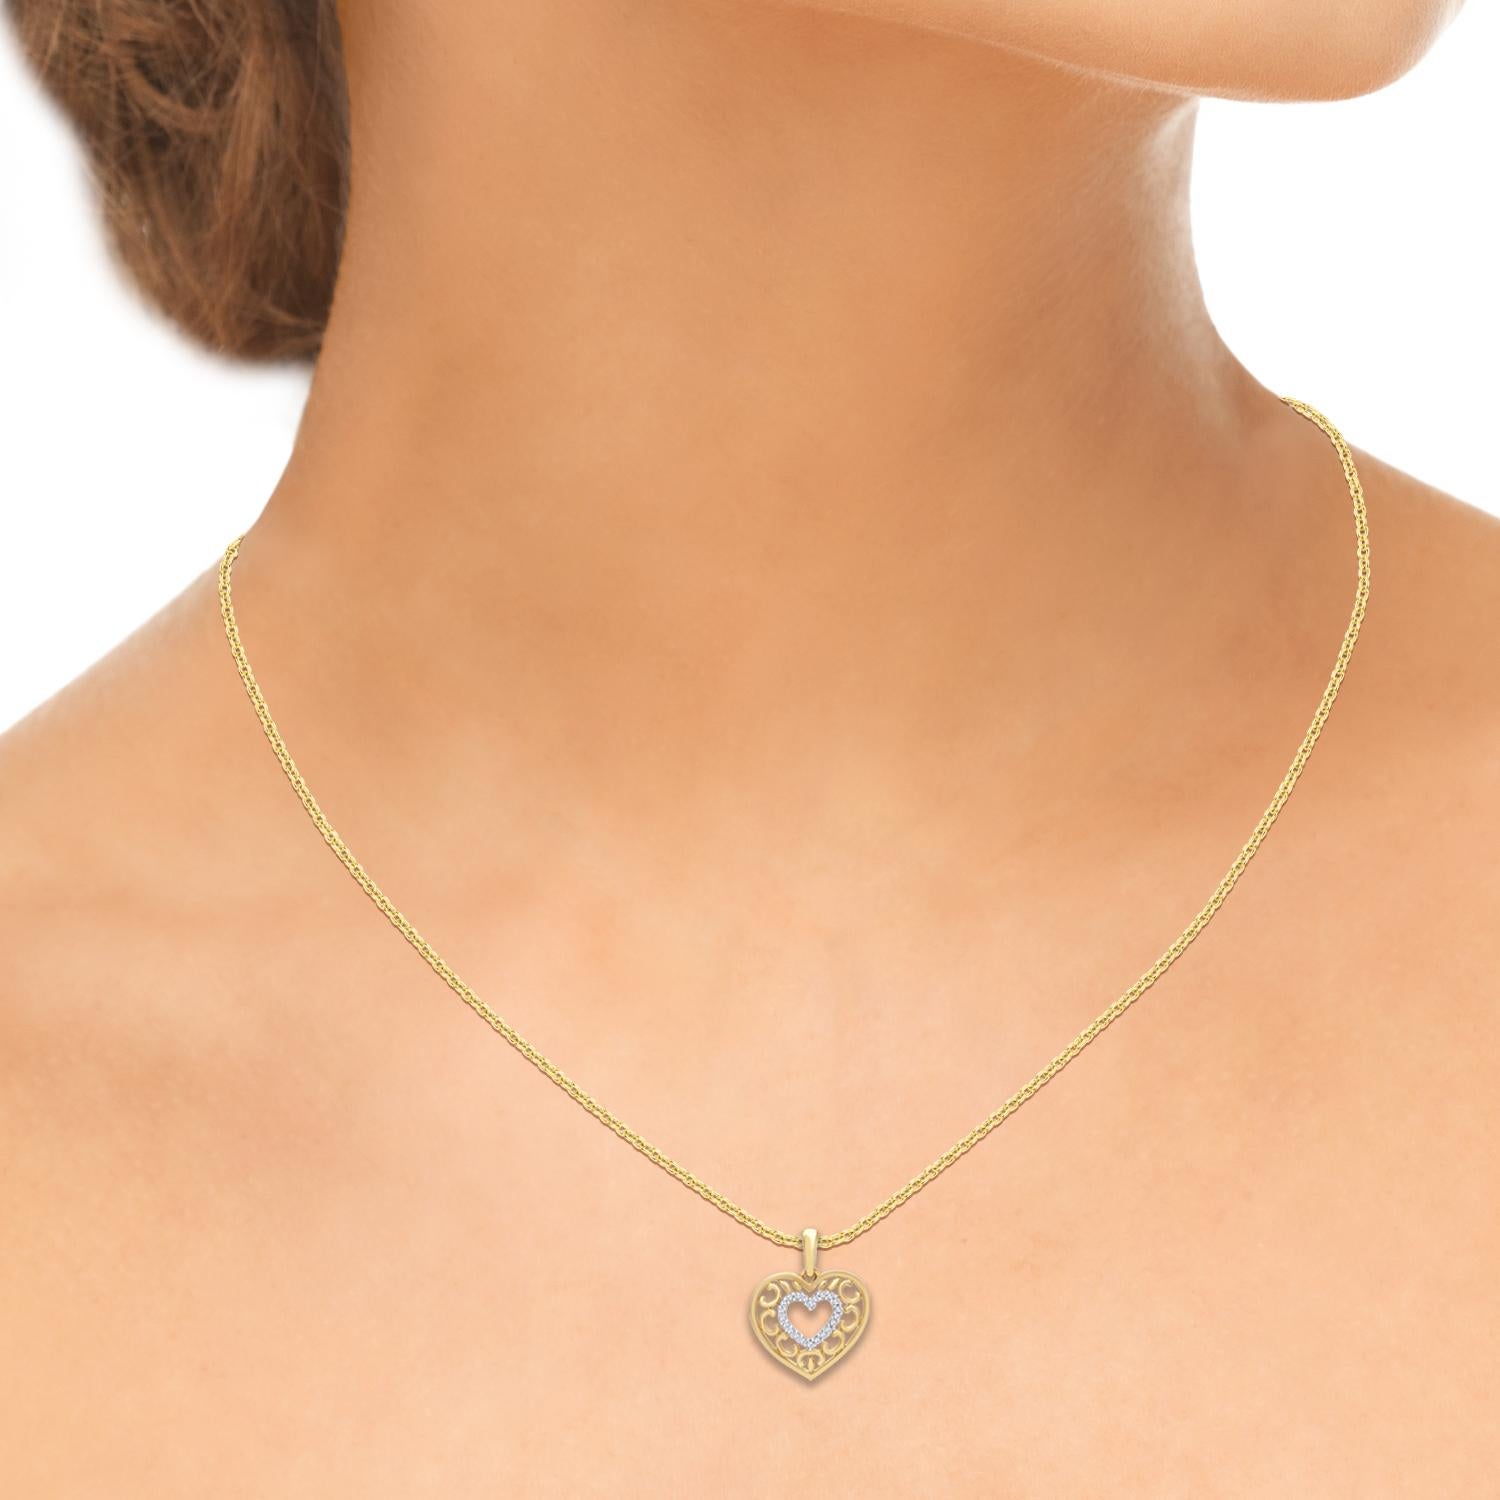 TJD 0.04 Carat Round Diamond 14 Karat Yellow Gold Heart Pendant Necklace In New Condition For Sale In New York, NY